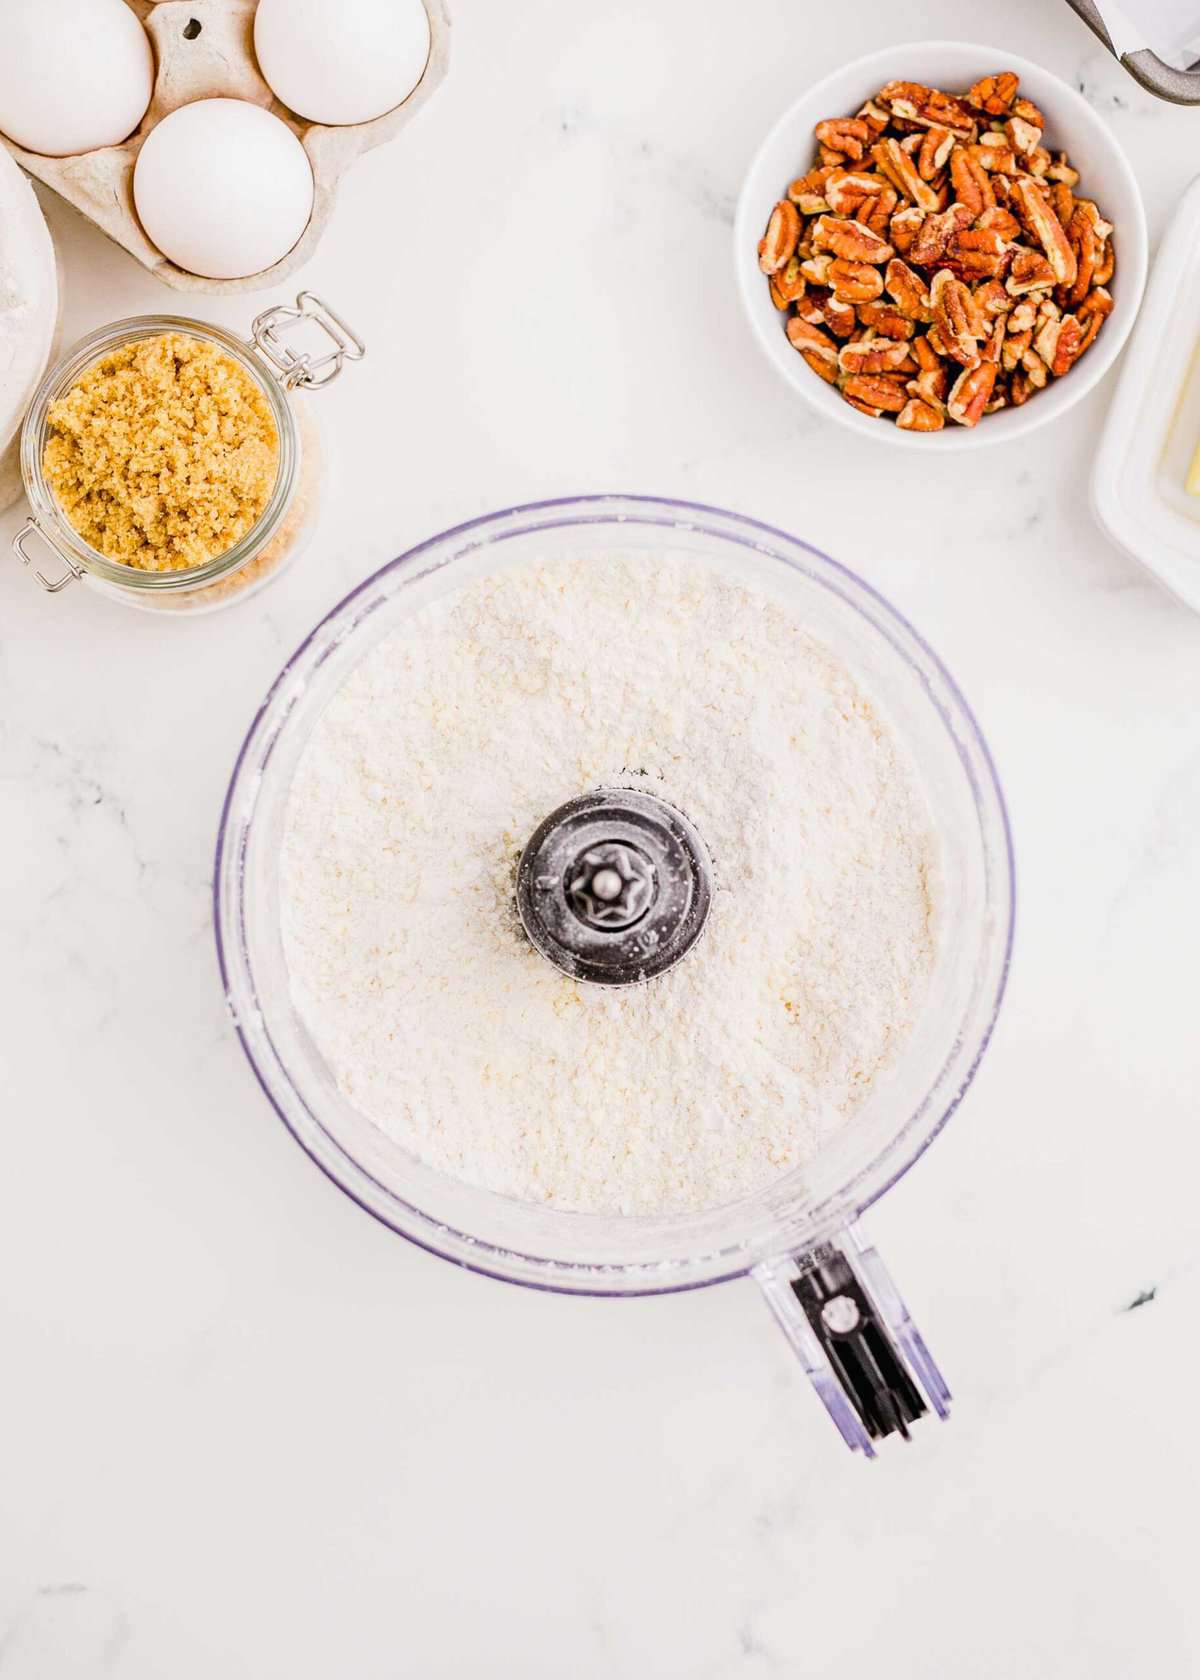 pulsed butter, flour, and powdered sugar in a food processor